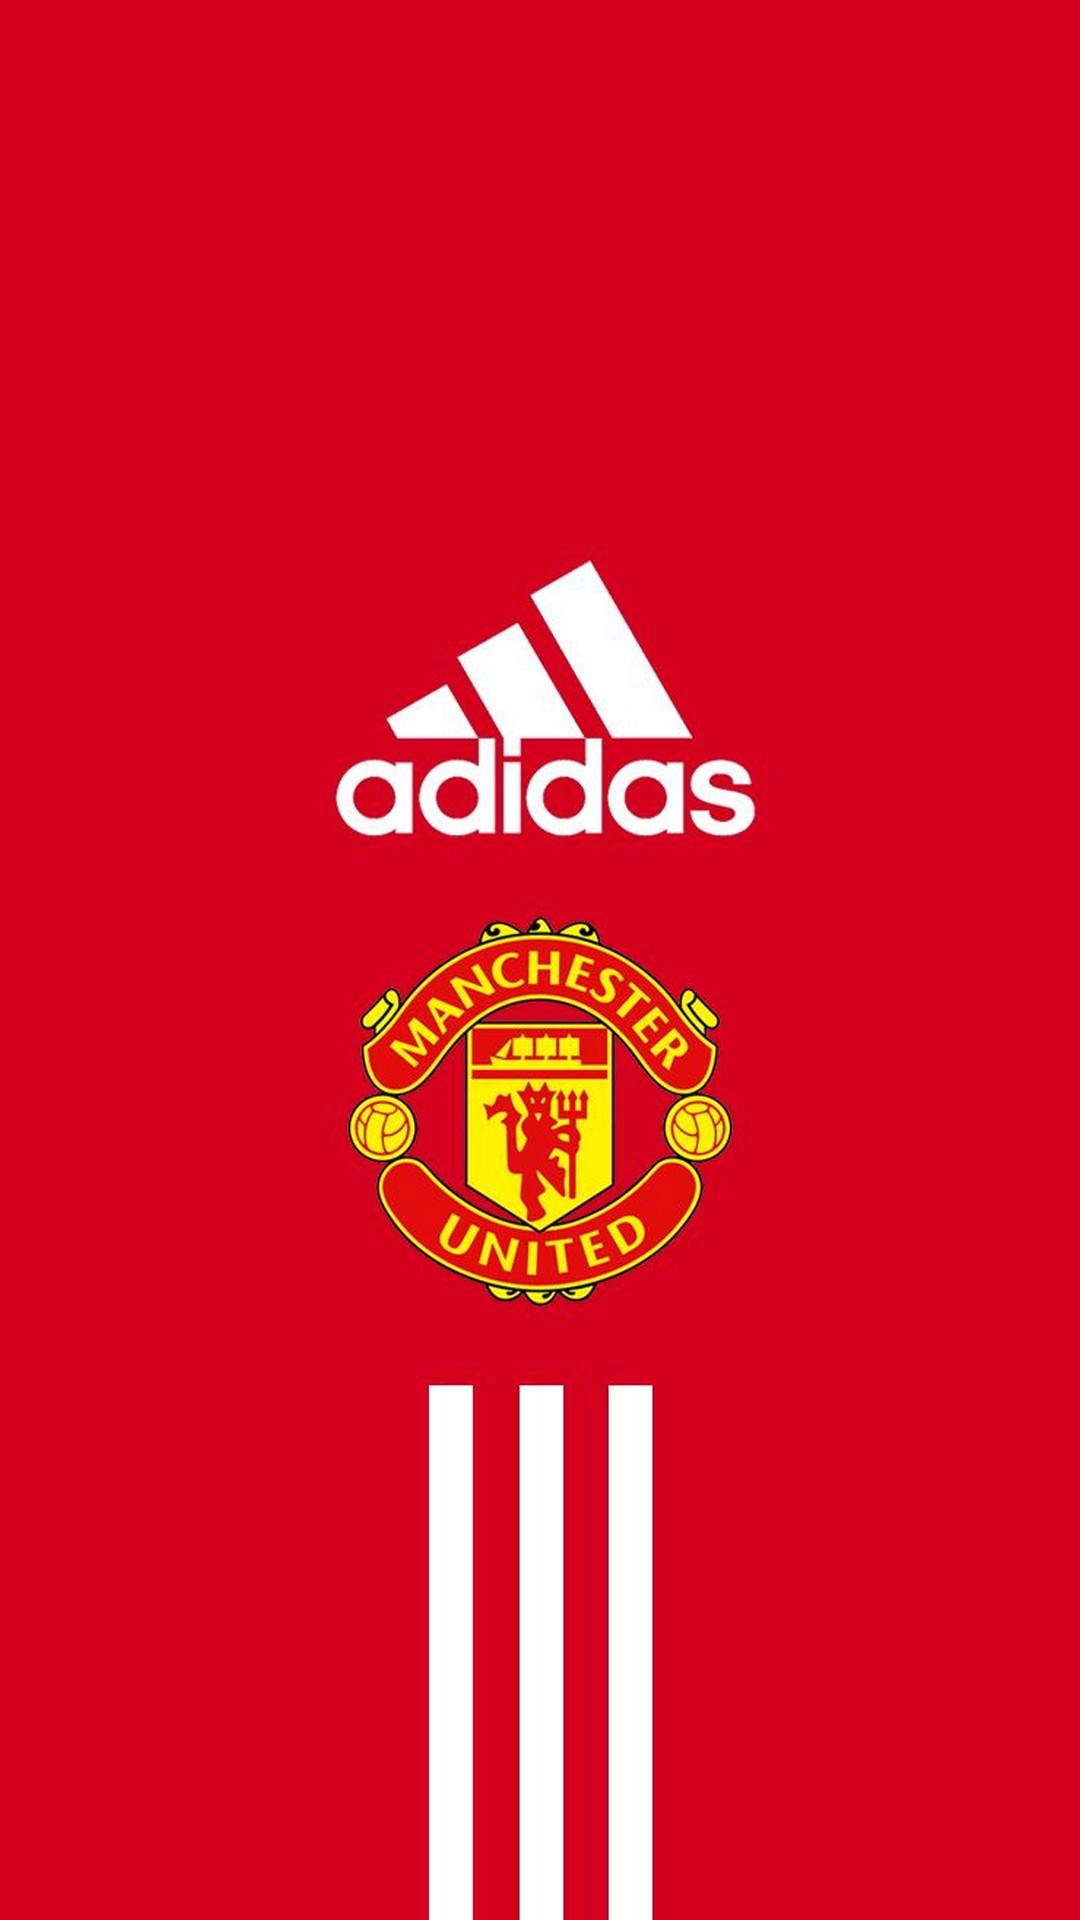 iPhone Wallpaper HD Manchester United with high-resolution 1080x1920 pixel. You can use this wallpaper for your Desktop Computers, Mac Screensavers, Windows Backgrounds, iPhone Wallpapers, Tablet or Android Lock screen and another Mobile device